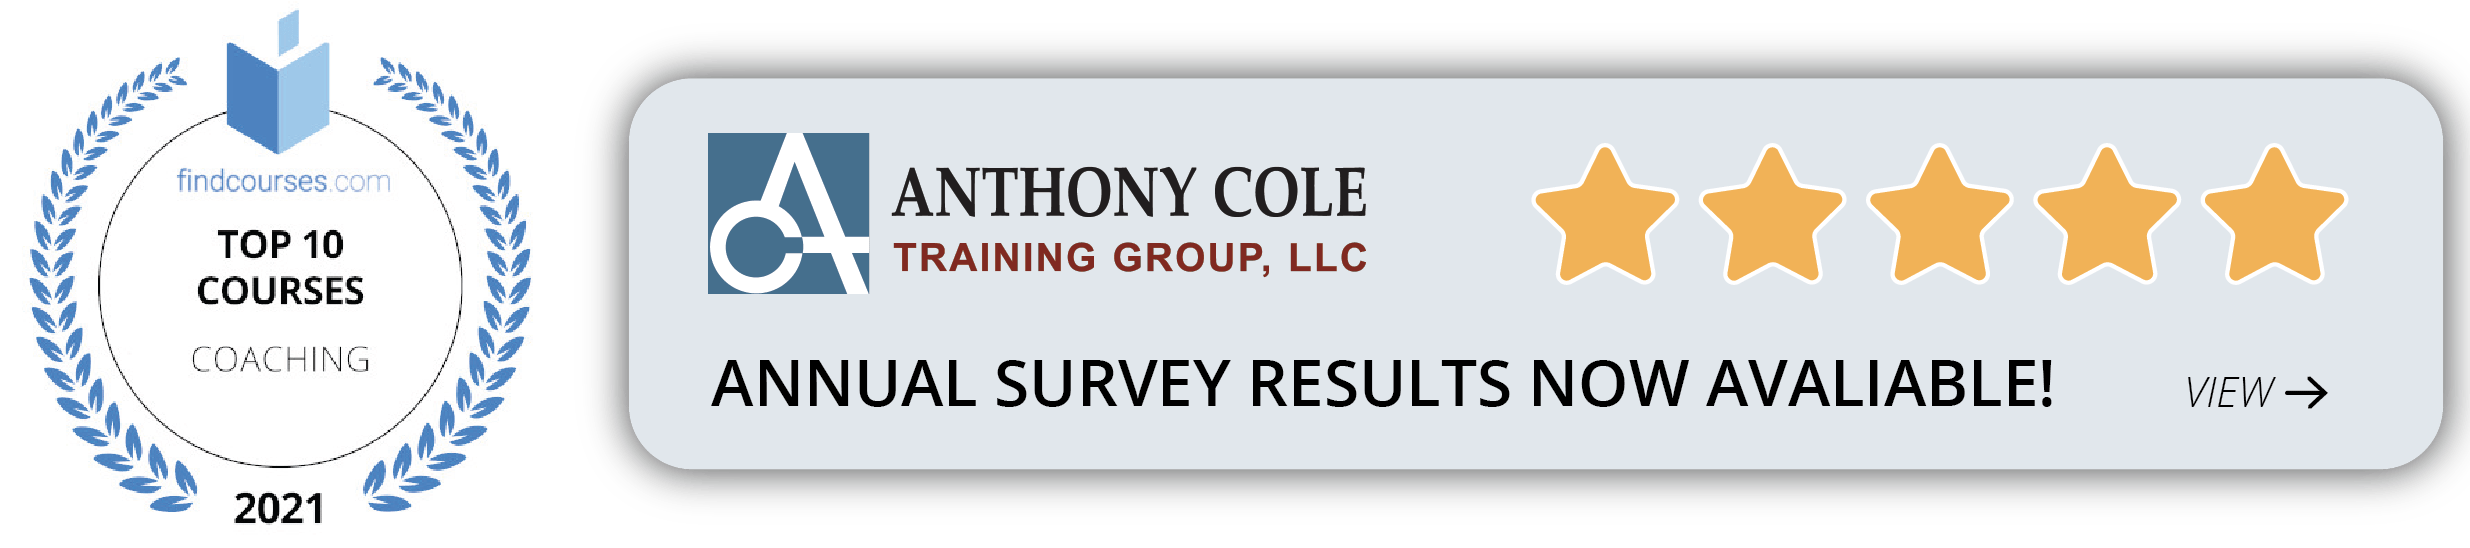 Annual Survey Results 